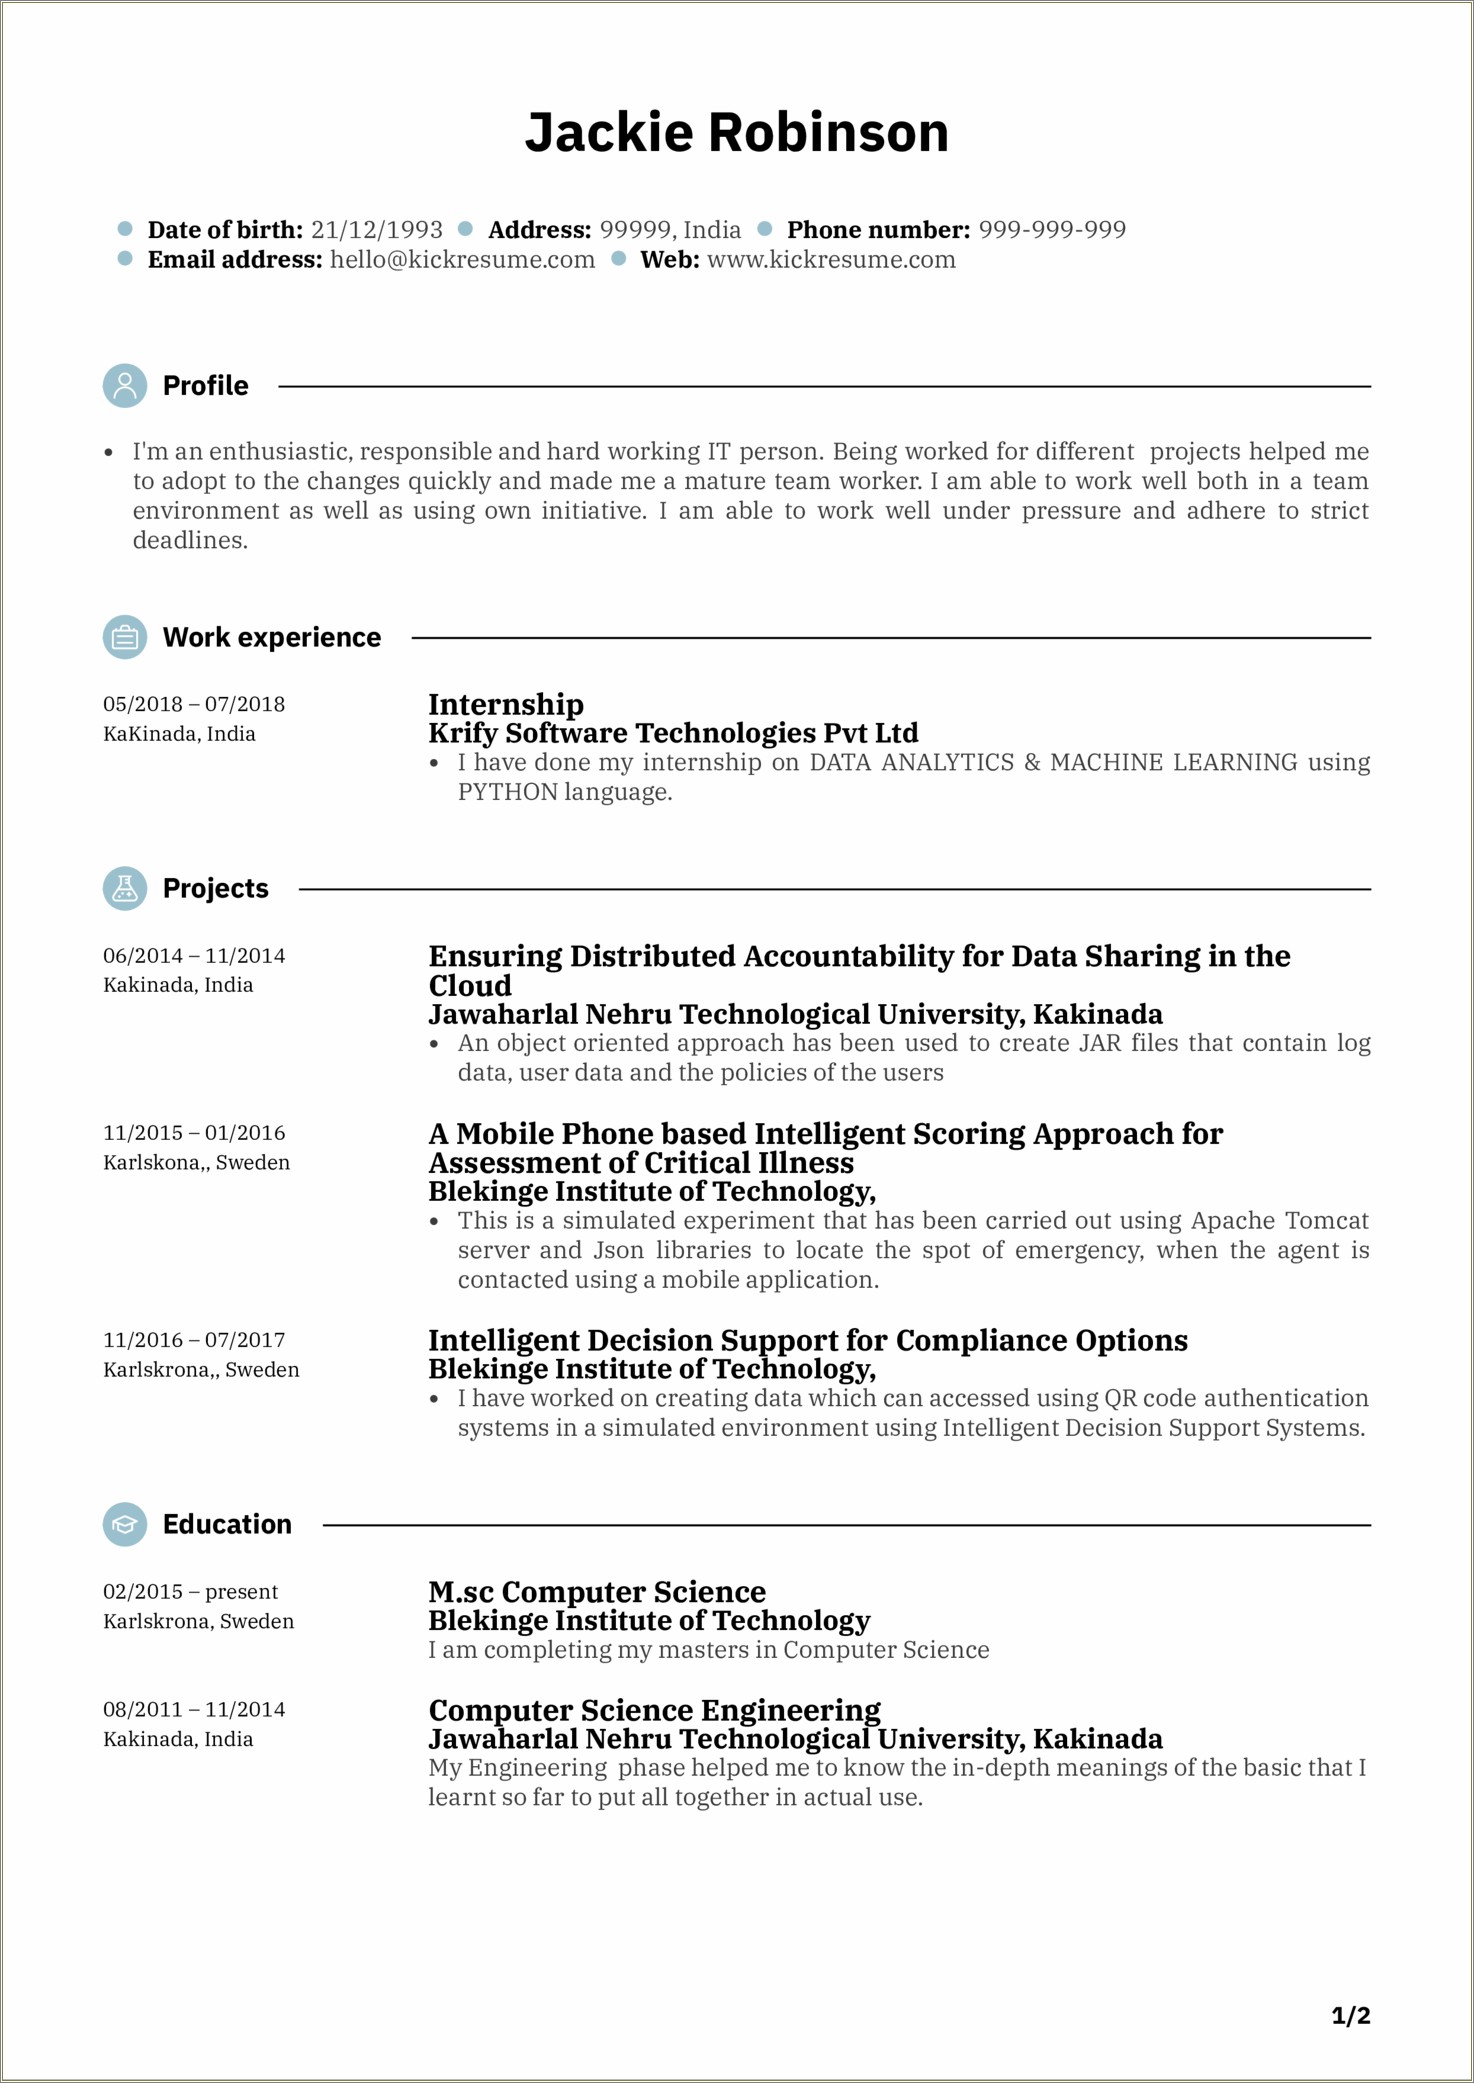 Describe Your Lab Experience In Computer Engineering Resume